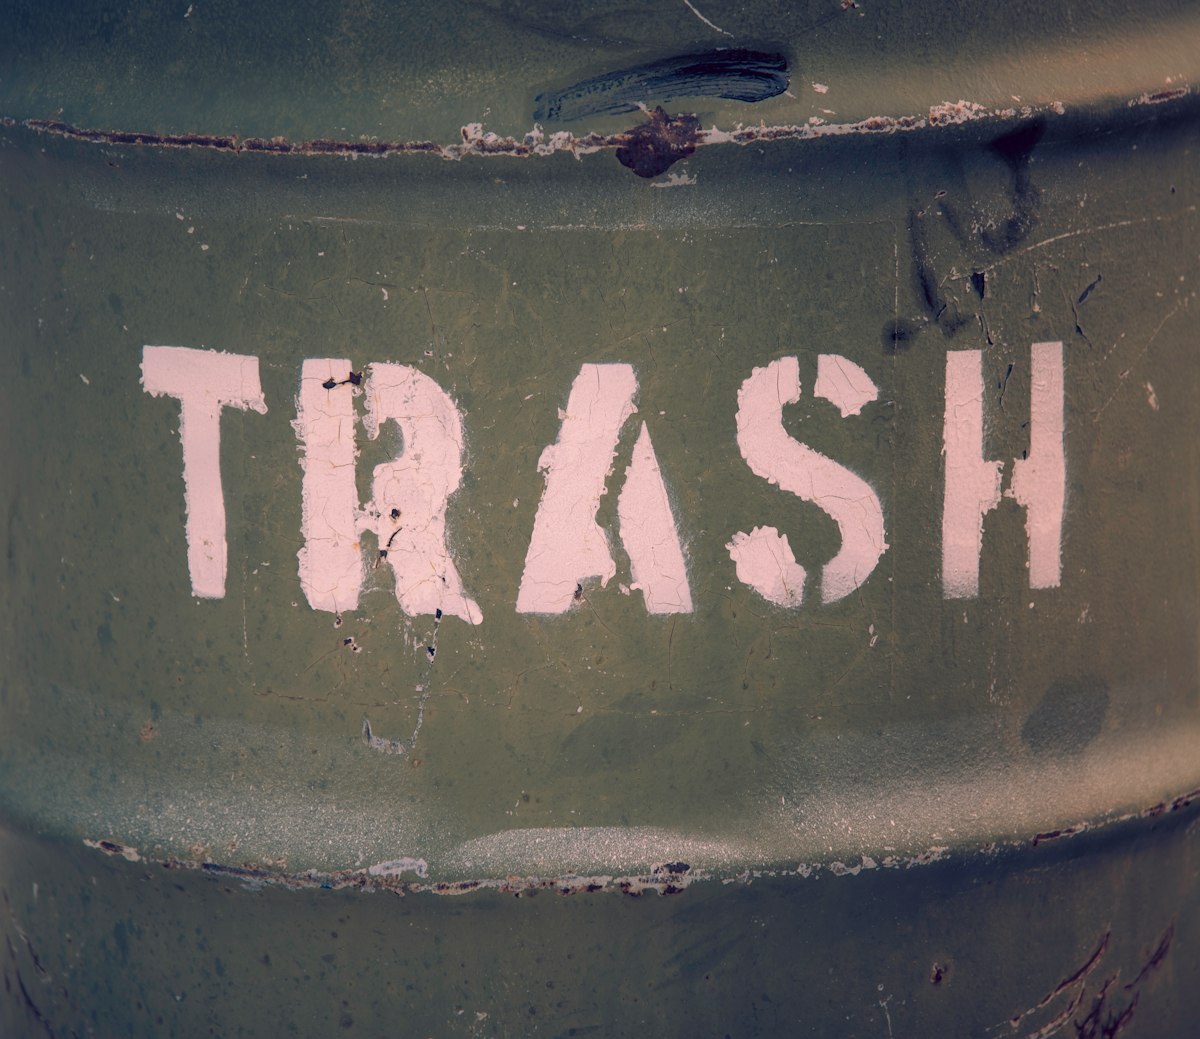 Product Management as Garbage Collector